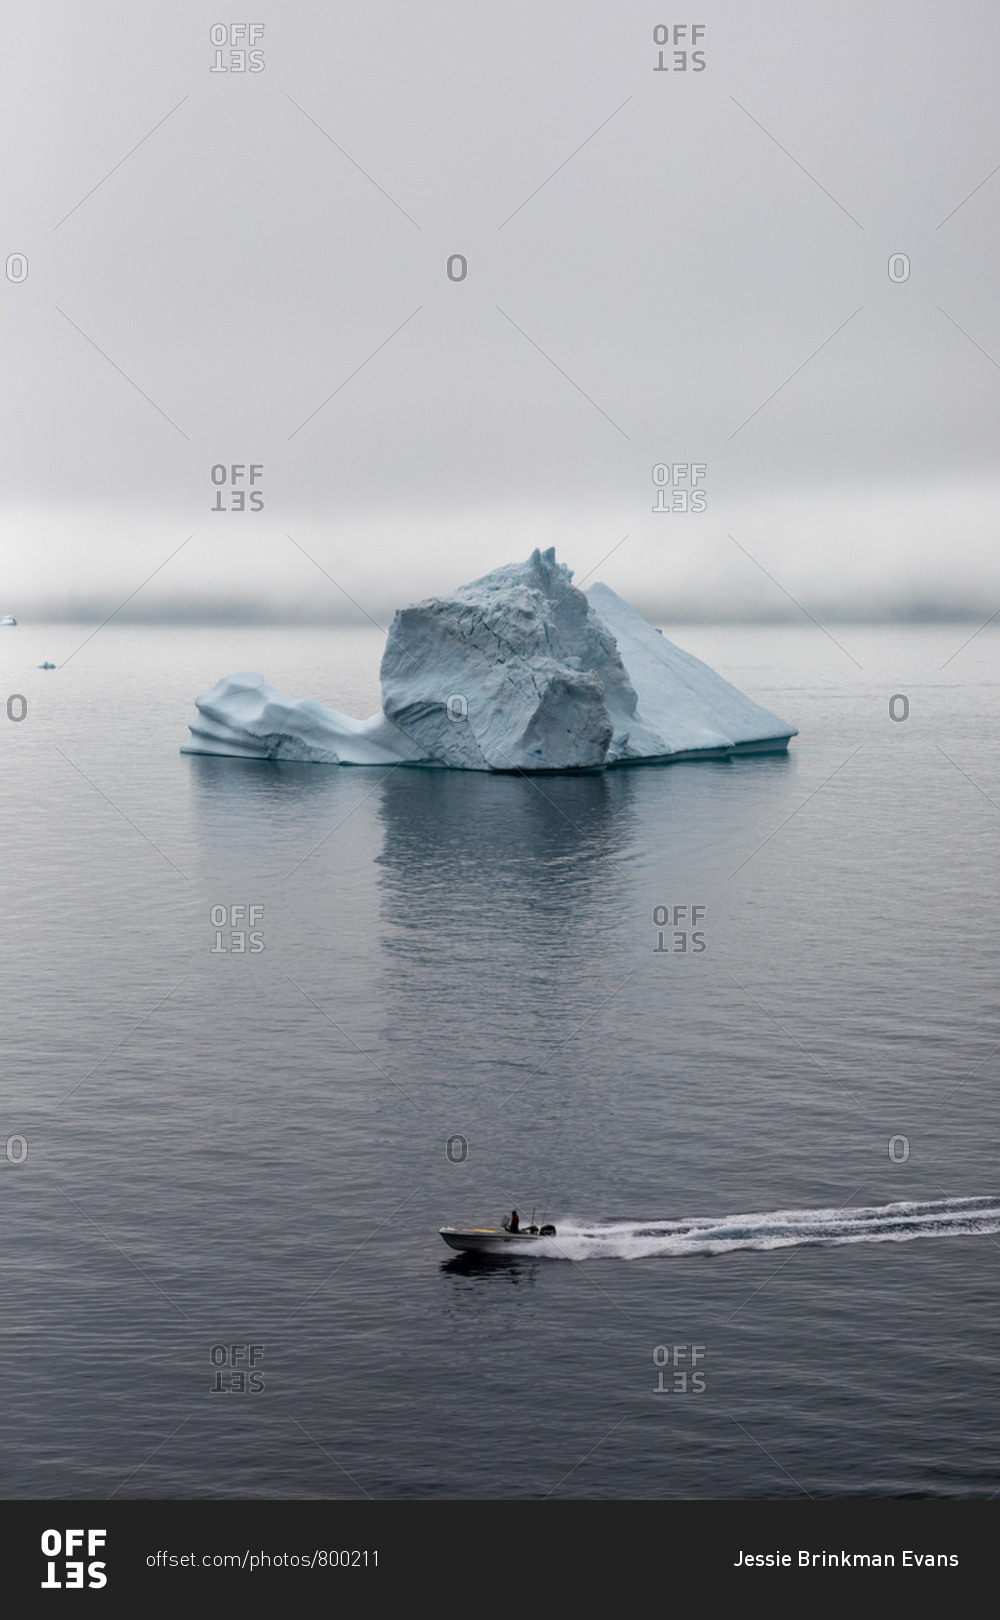 Boat moving past iceberg in the sea